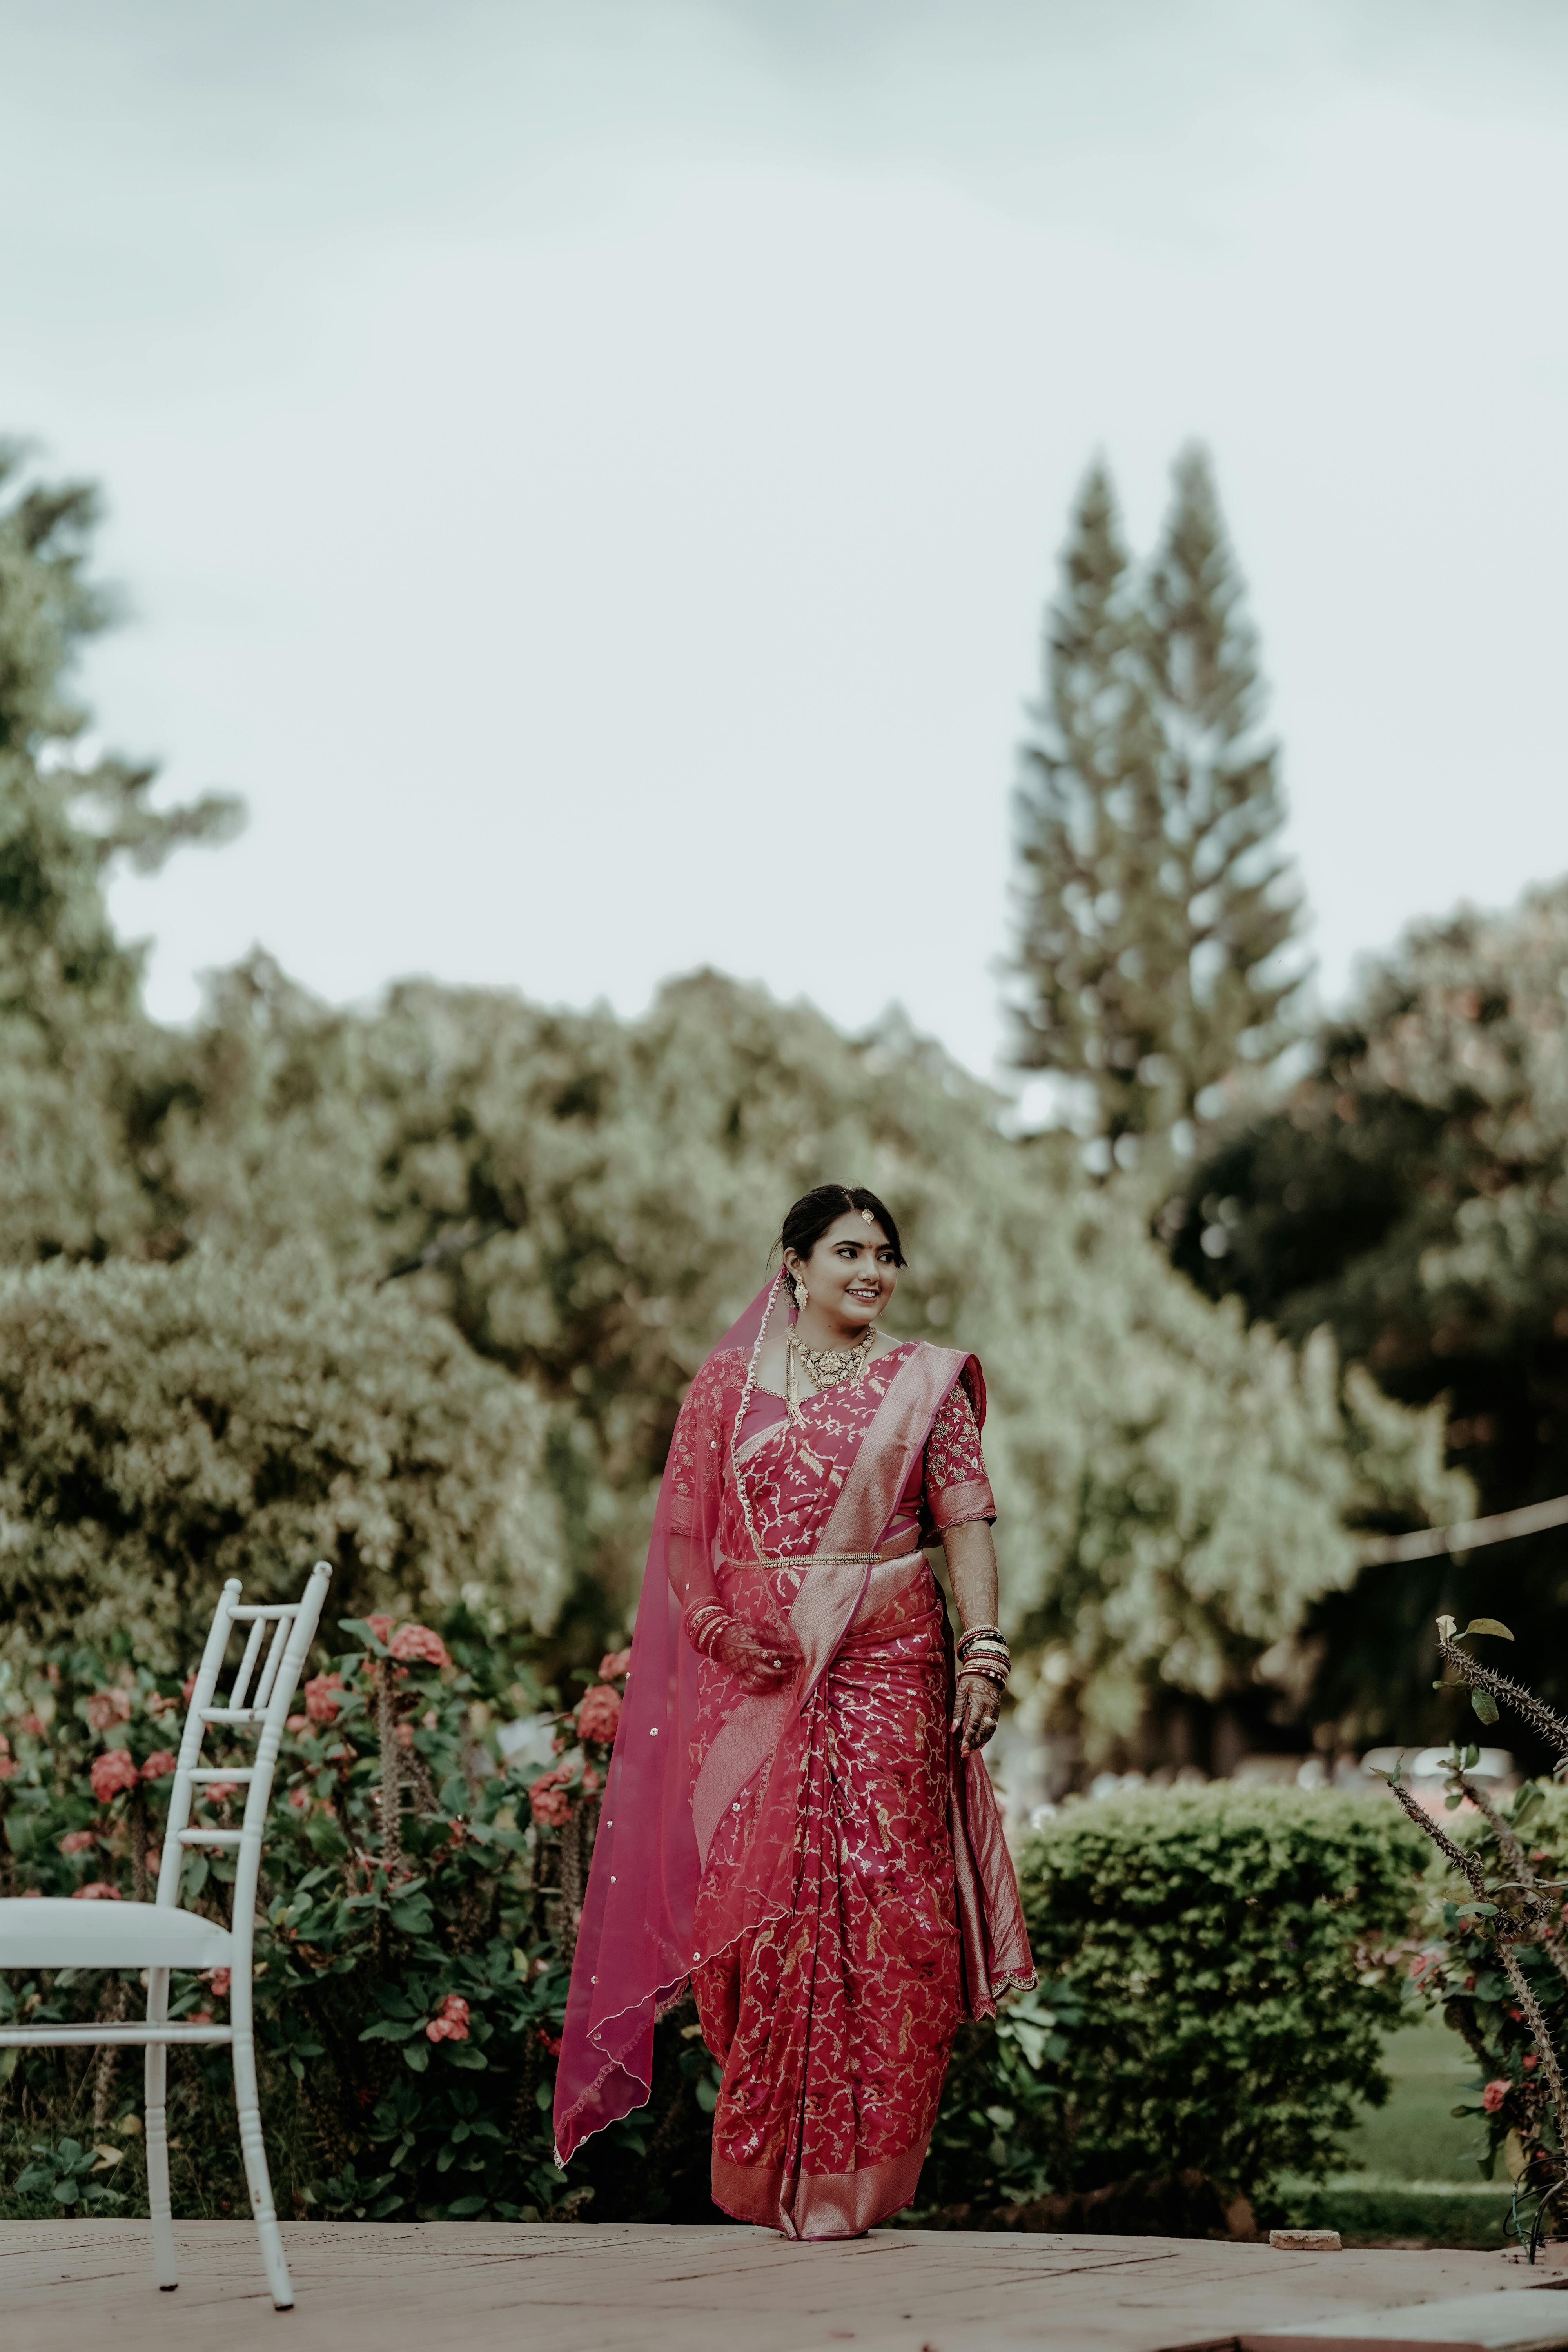 The Bridal Box - All Your Wedding Needs @ One Place | Indian wedding dress,  Indian bridal wear, Indian wedding dress red